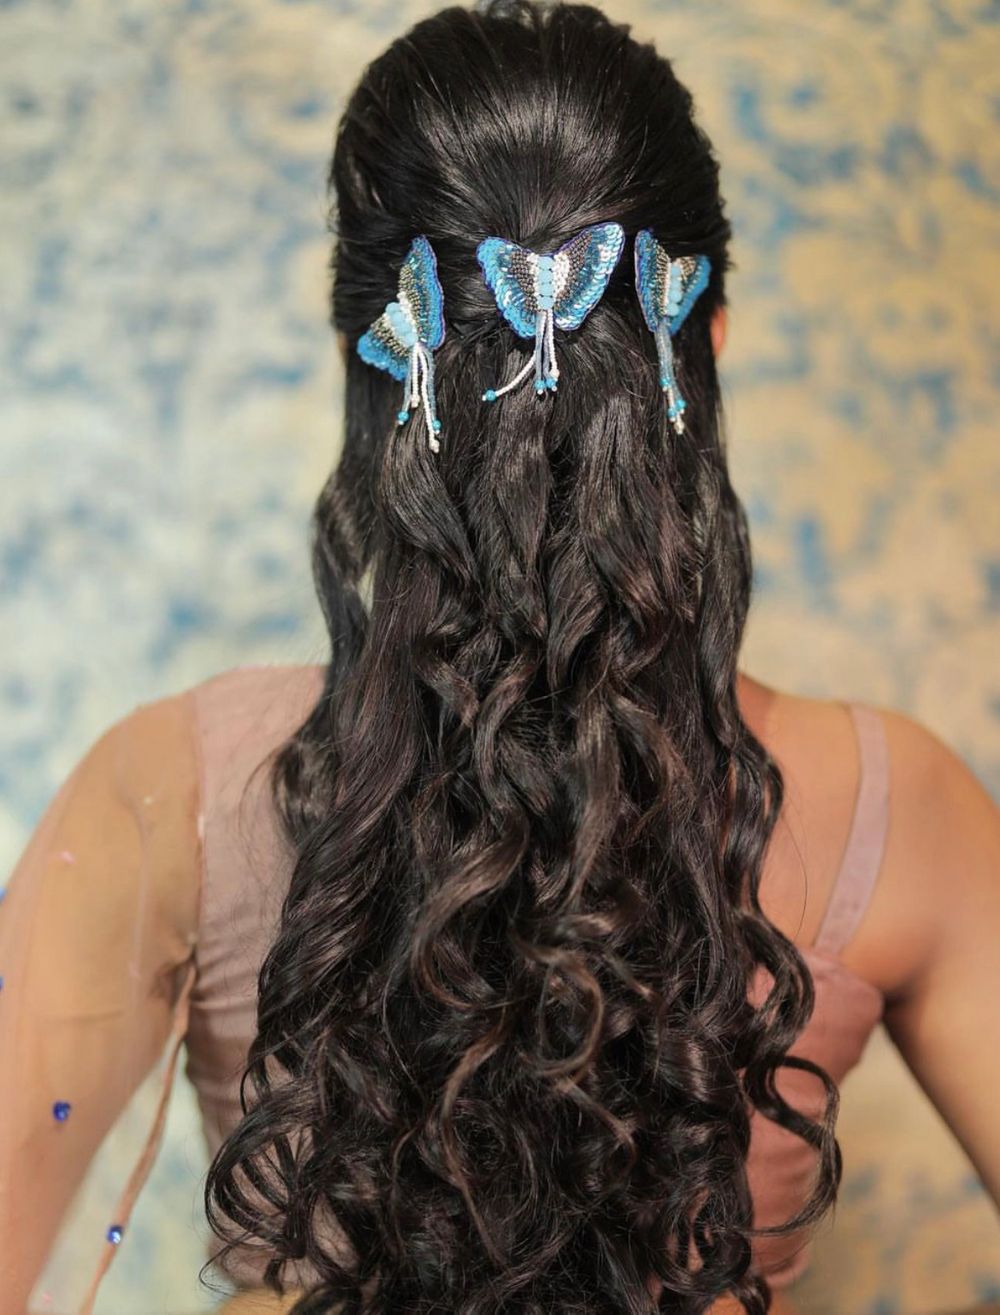 Photo From Hairstyles - By Yashika Panchal